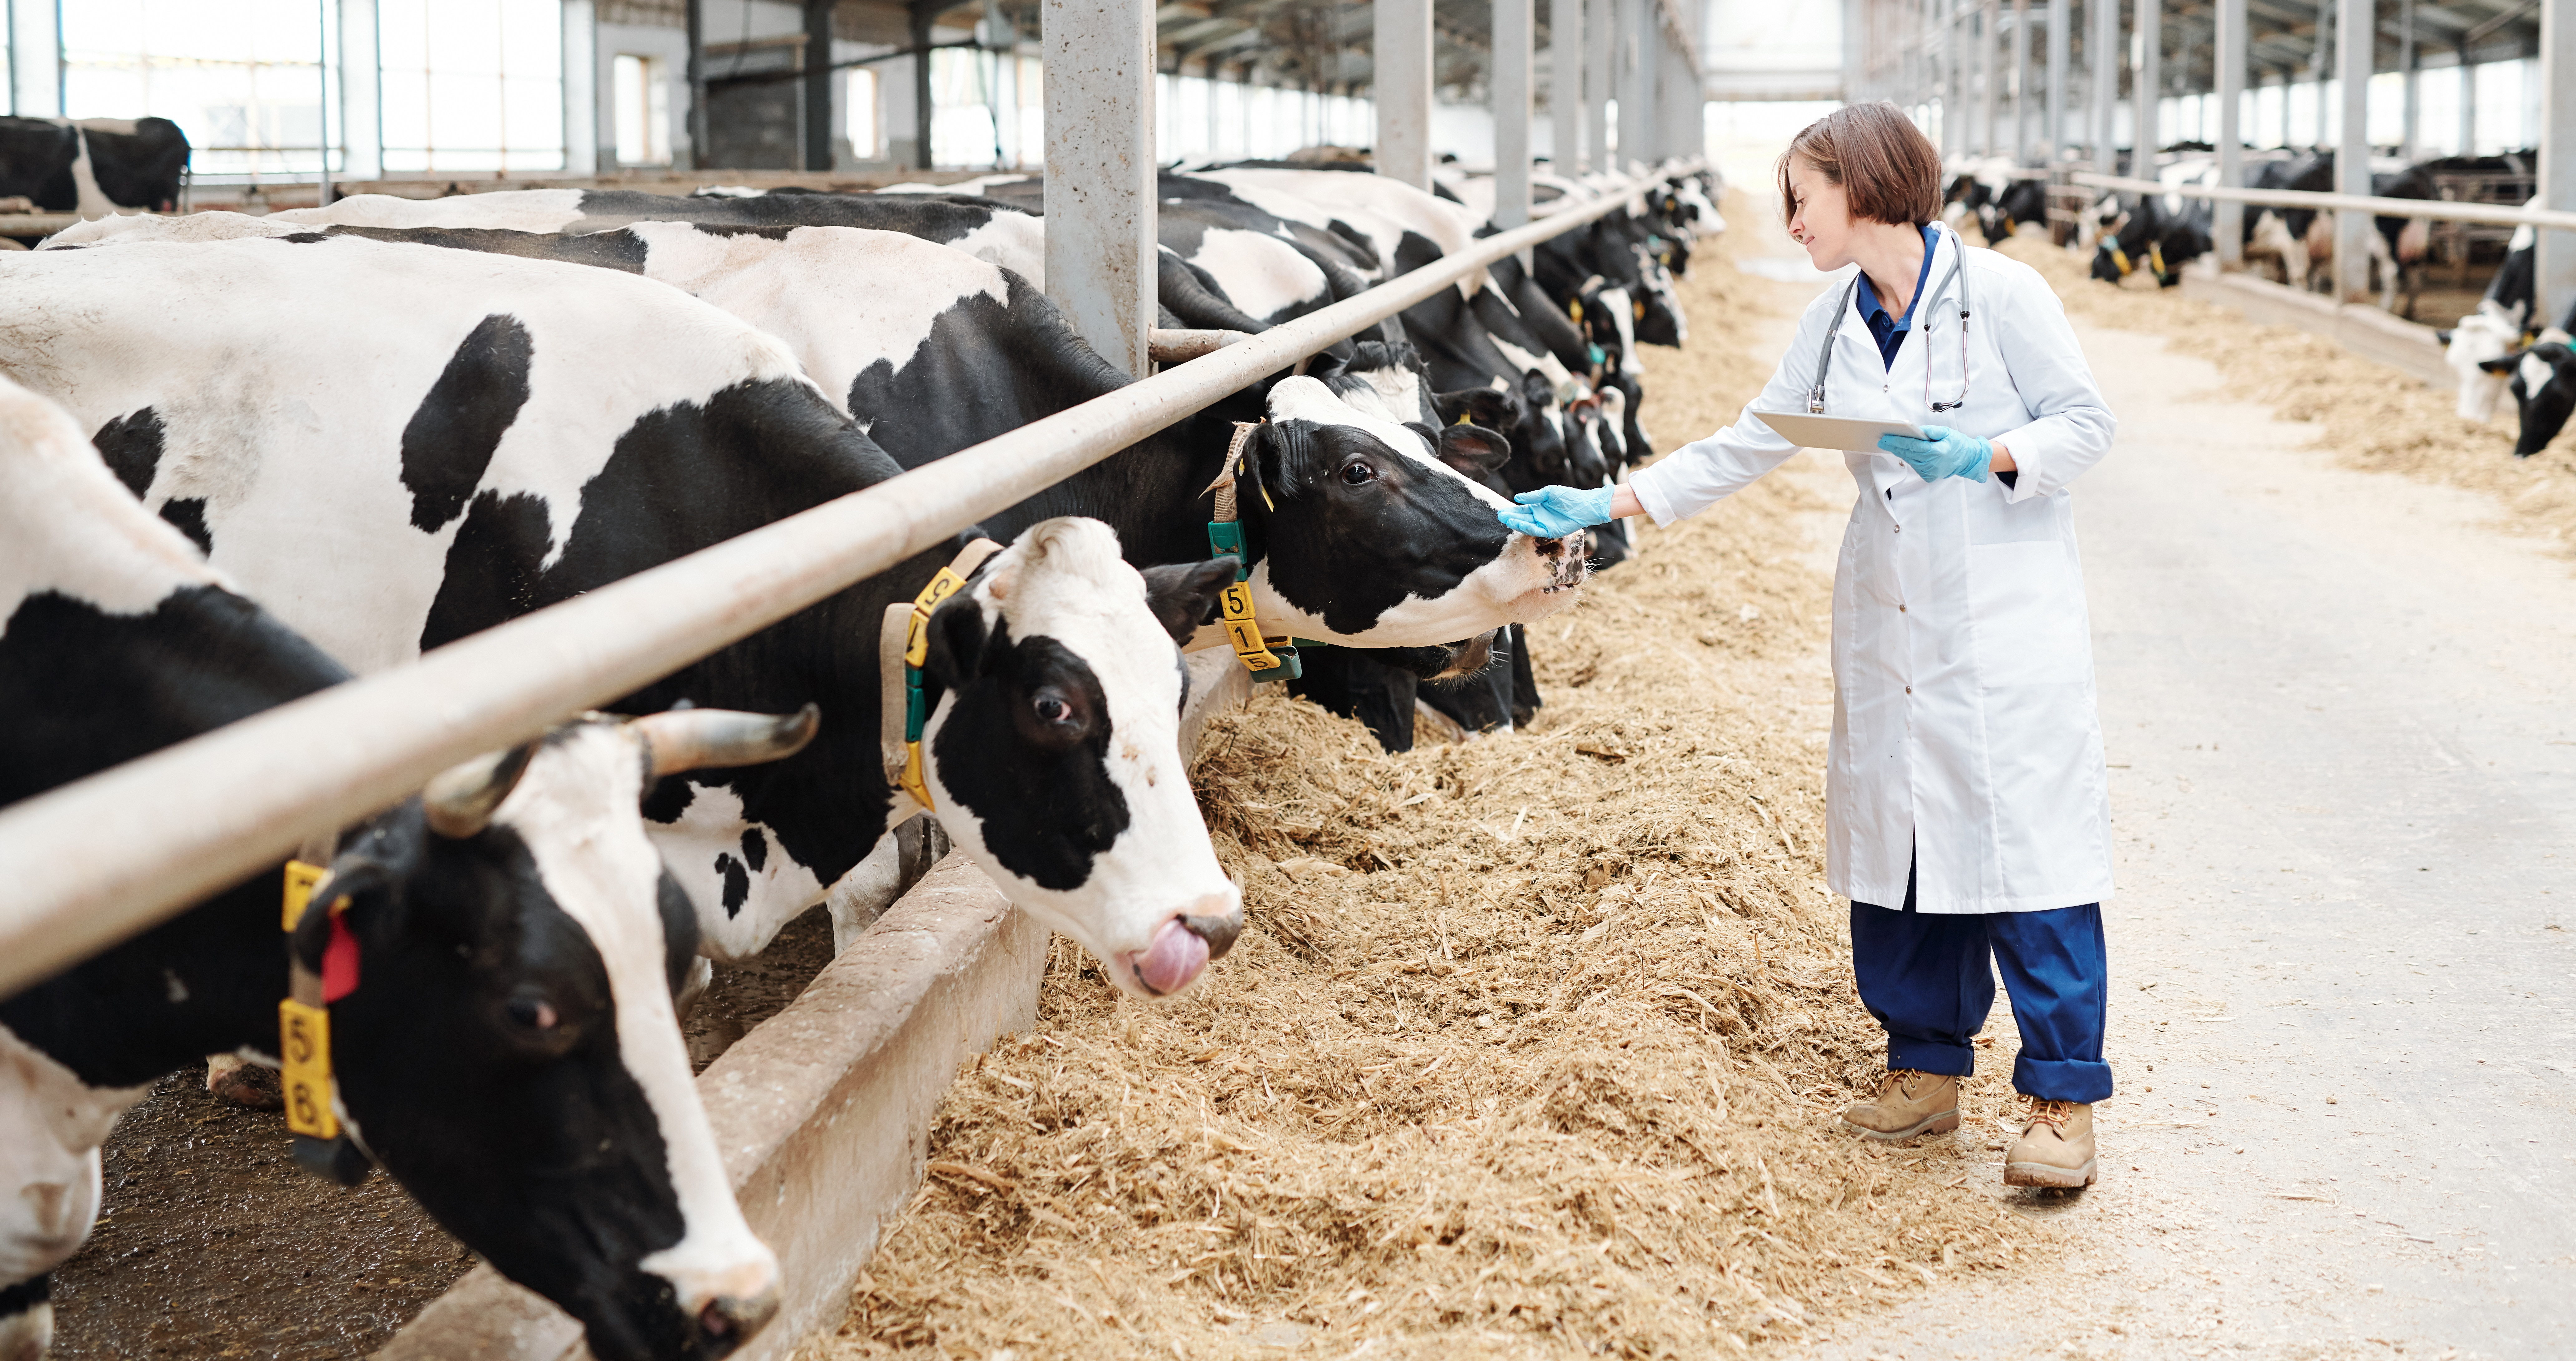 woman in lab coat holding a clip board standing in the center aisle of a large metal dairy barn petting the nose of one of the many black and white cows